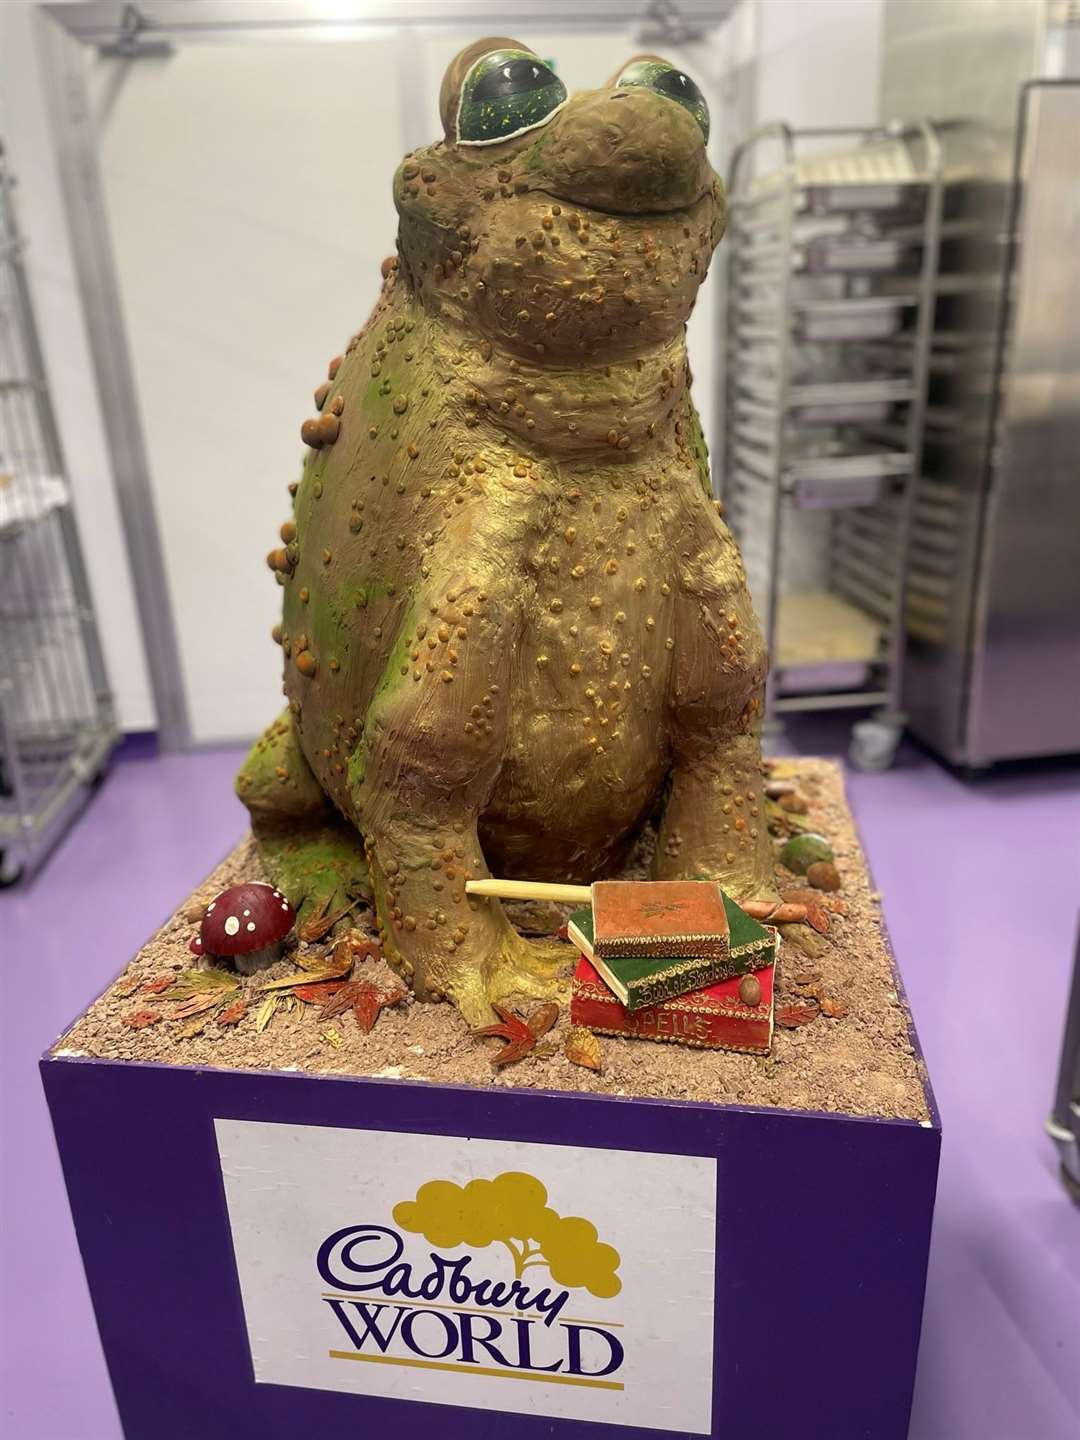 The toad is 90cm tall and the display features a wand and spell books (Phil Barnett/PA)